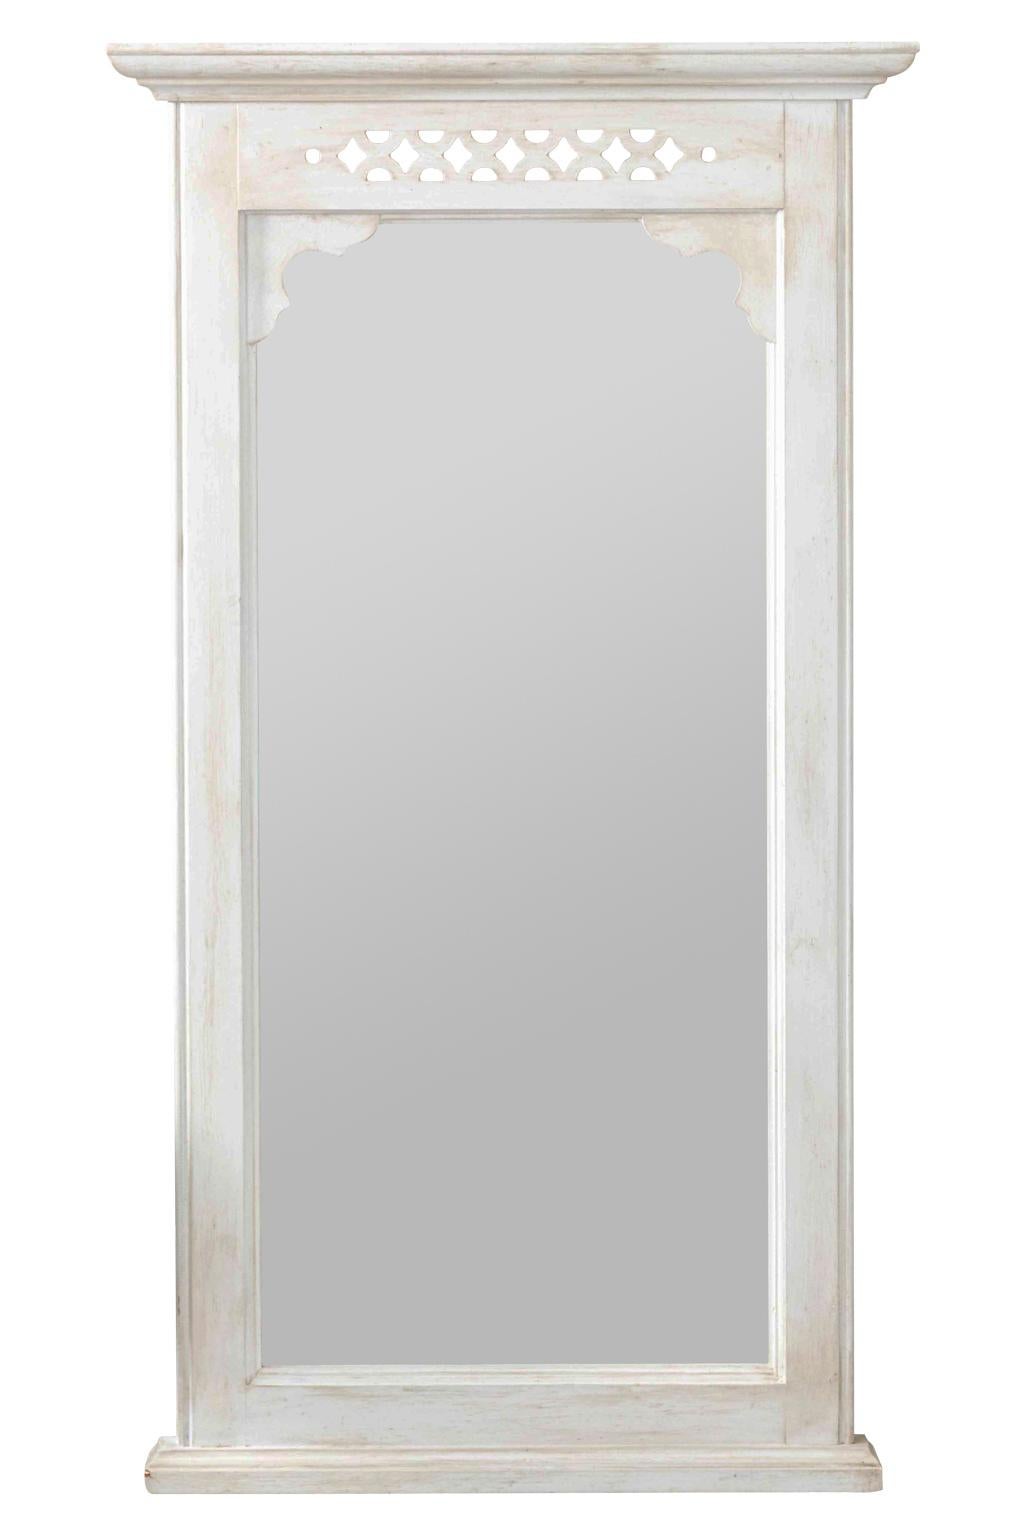 Pair of white painted wall mirrors in wood with pierced geometric crest and molded details, circa 1970s. Please note of wear consistent with age including minor wear to paint. Made in the United States.